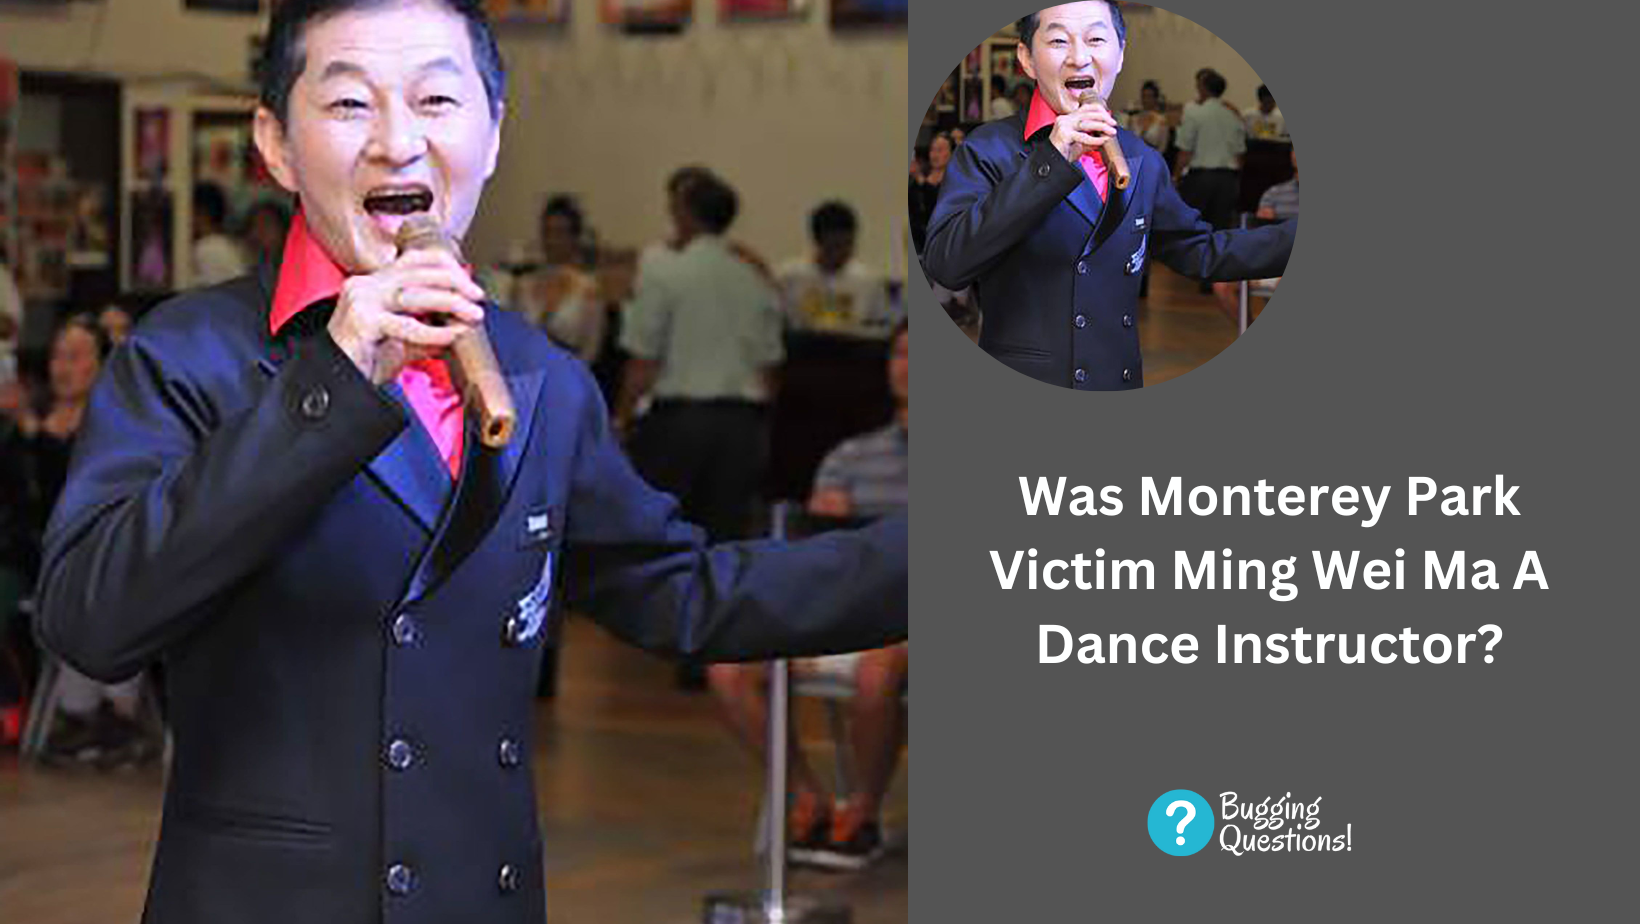 Was Monterey Park Victim Ming Wei Ma A Dance Instructor?